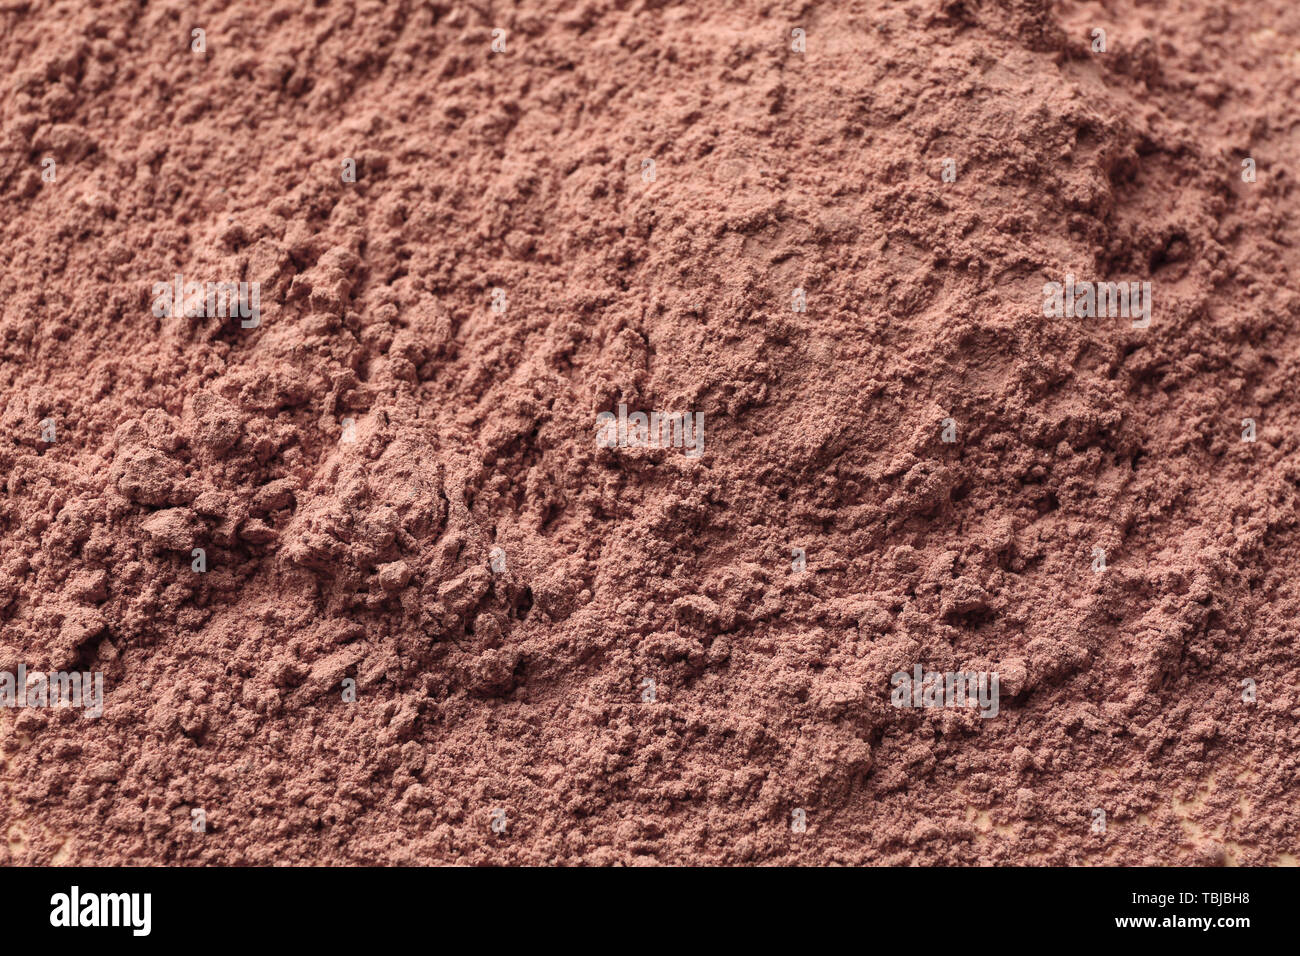 abstract of red clay soil, copper oxide contained rock in deep red